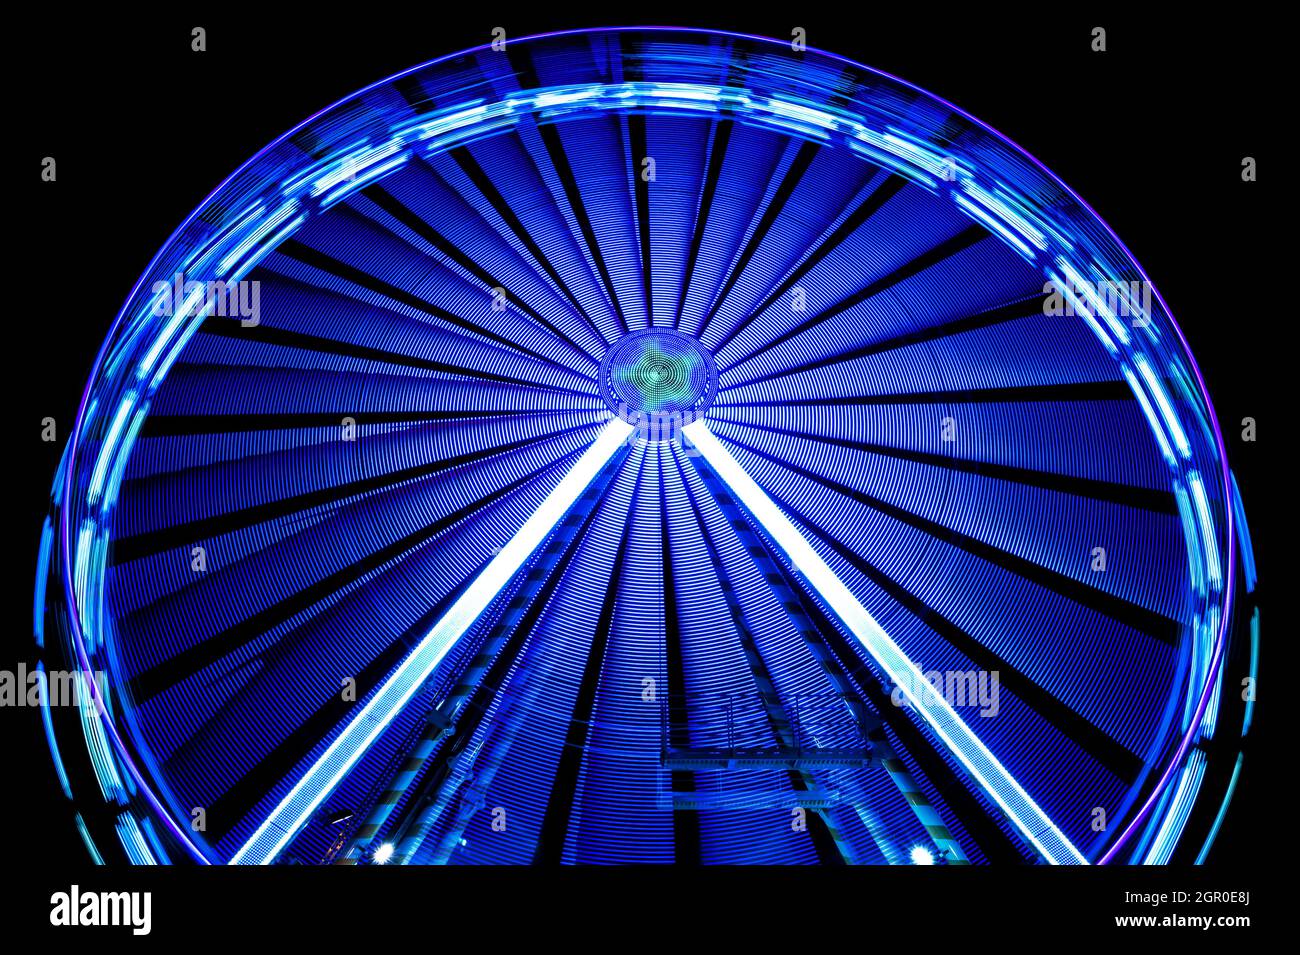 Ferris wheel at night, long exposure and blurred motion Stock Photo